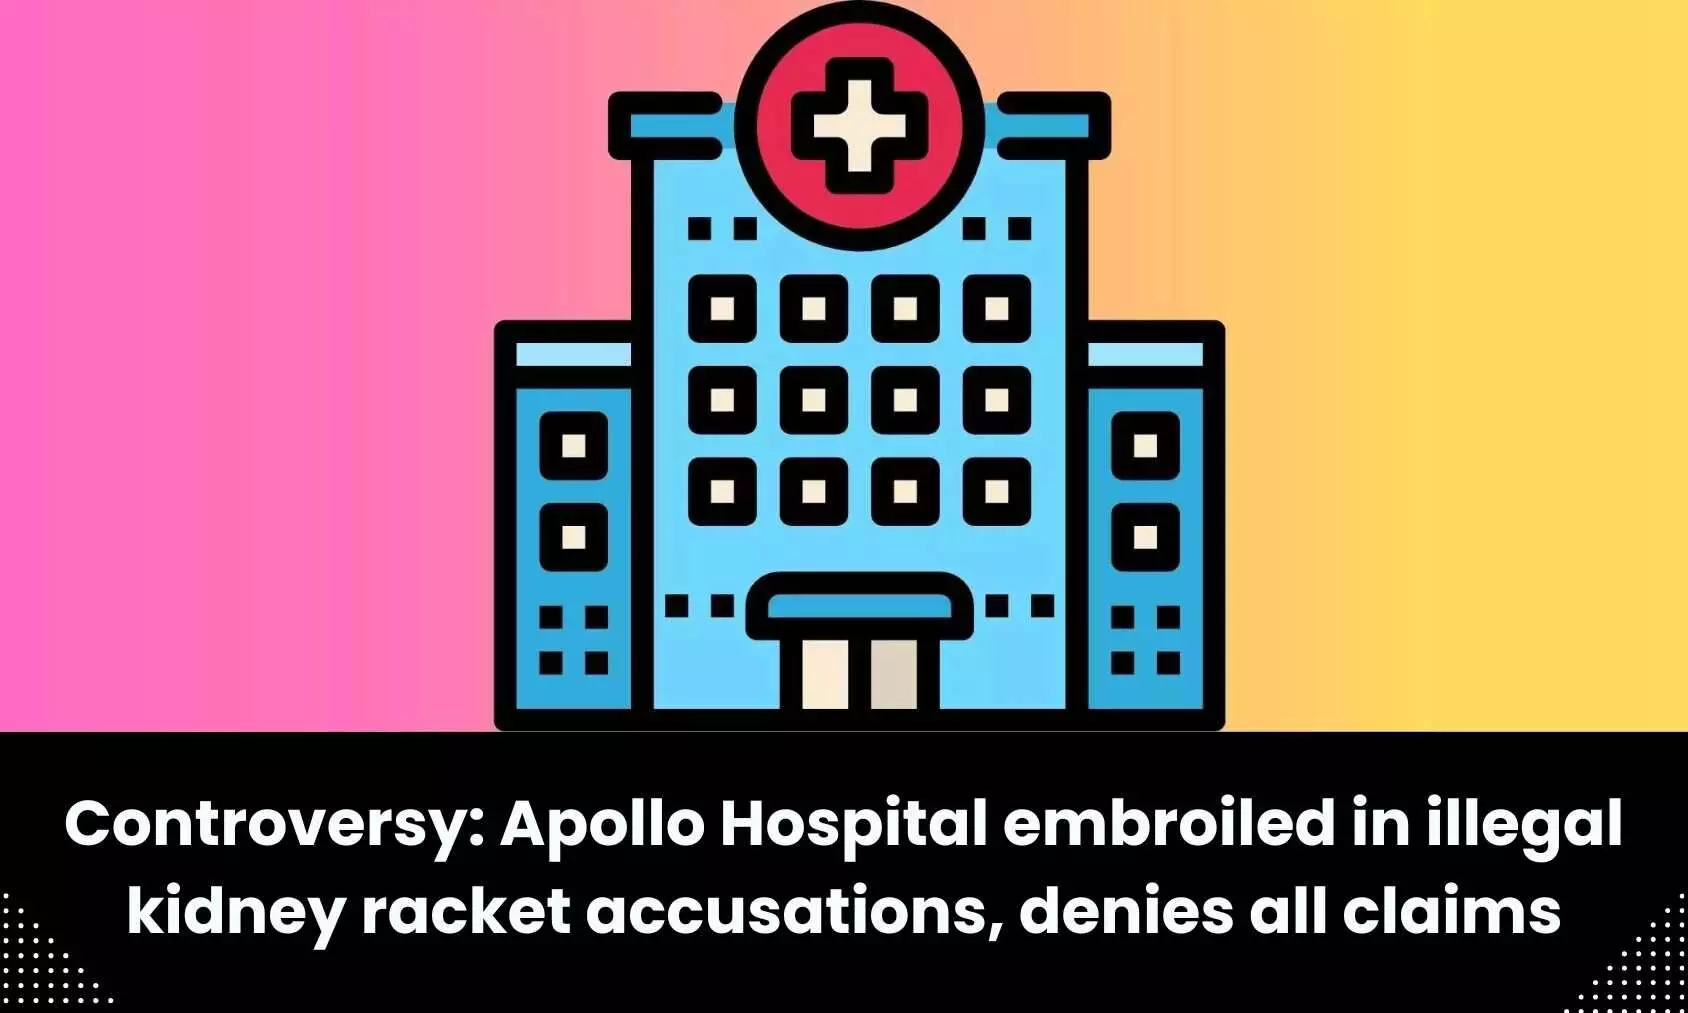 Apollo Hospital embroiled in illegal kidney racket accusations